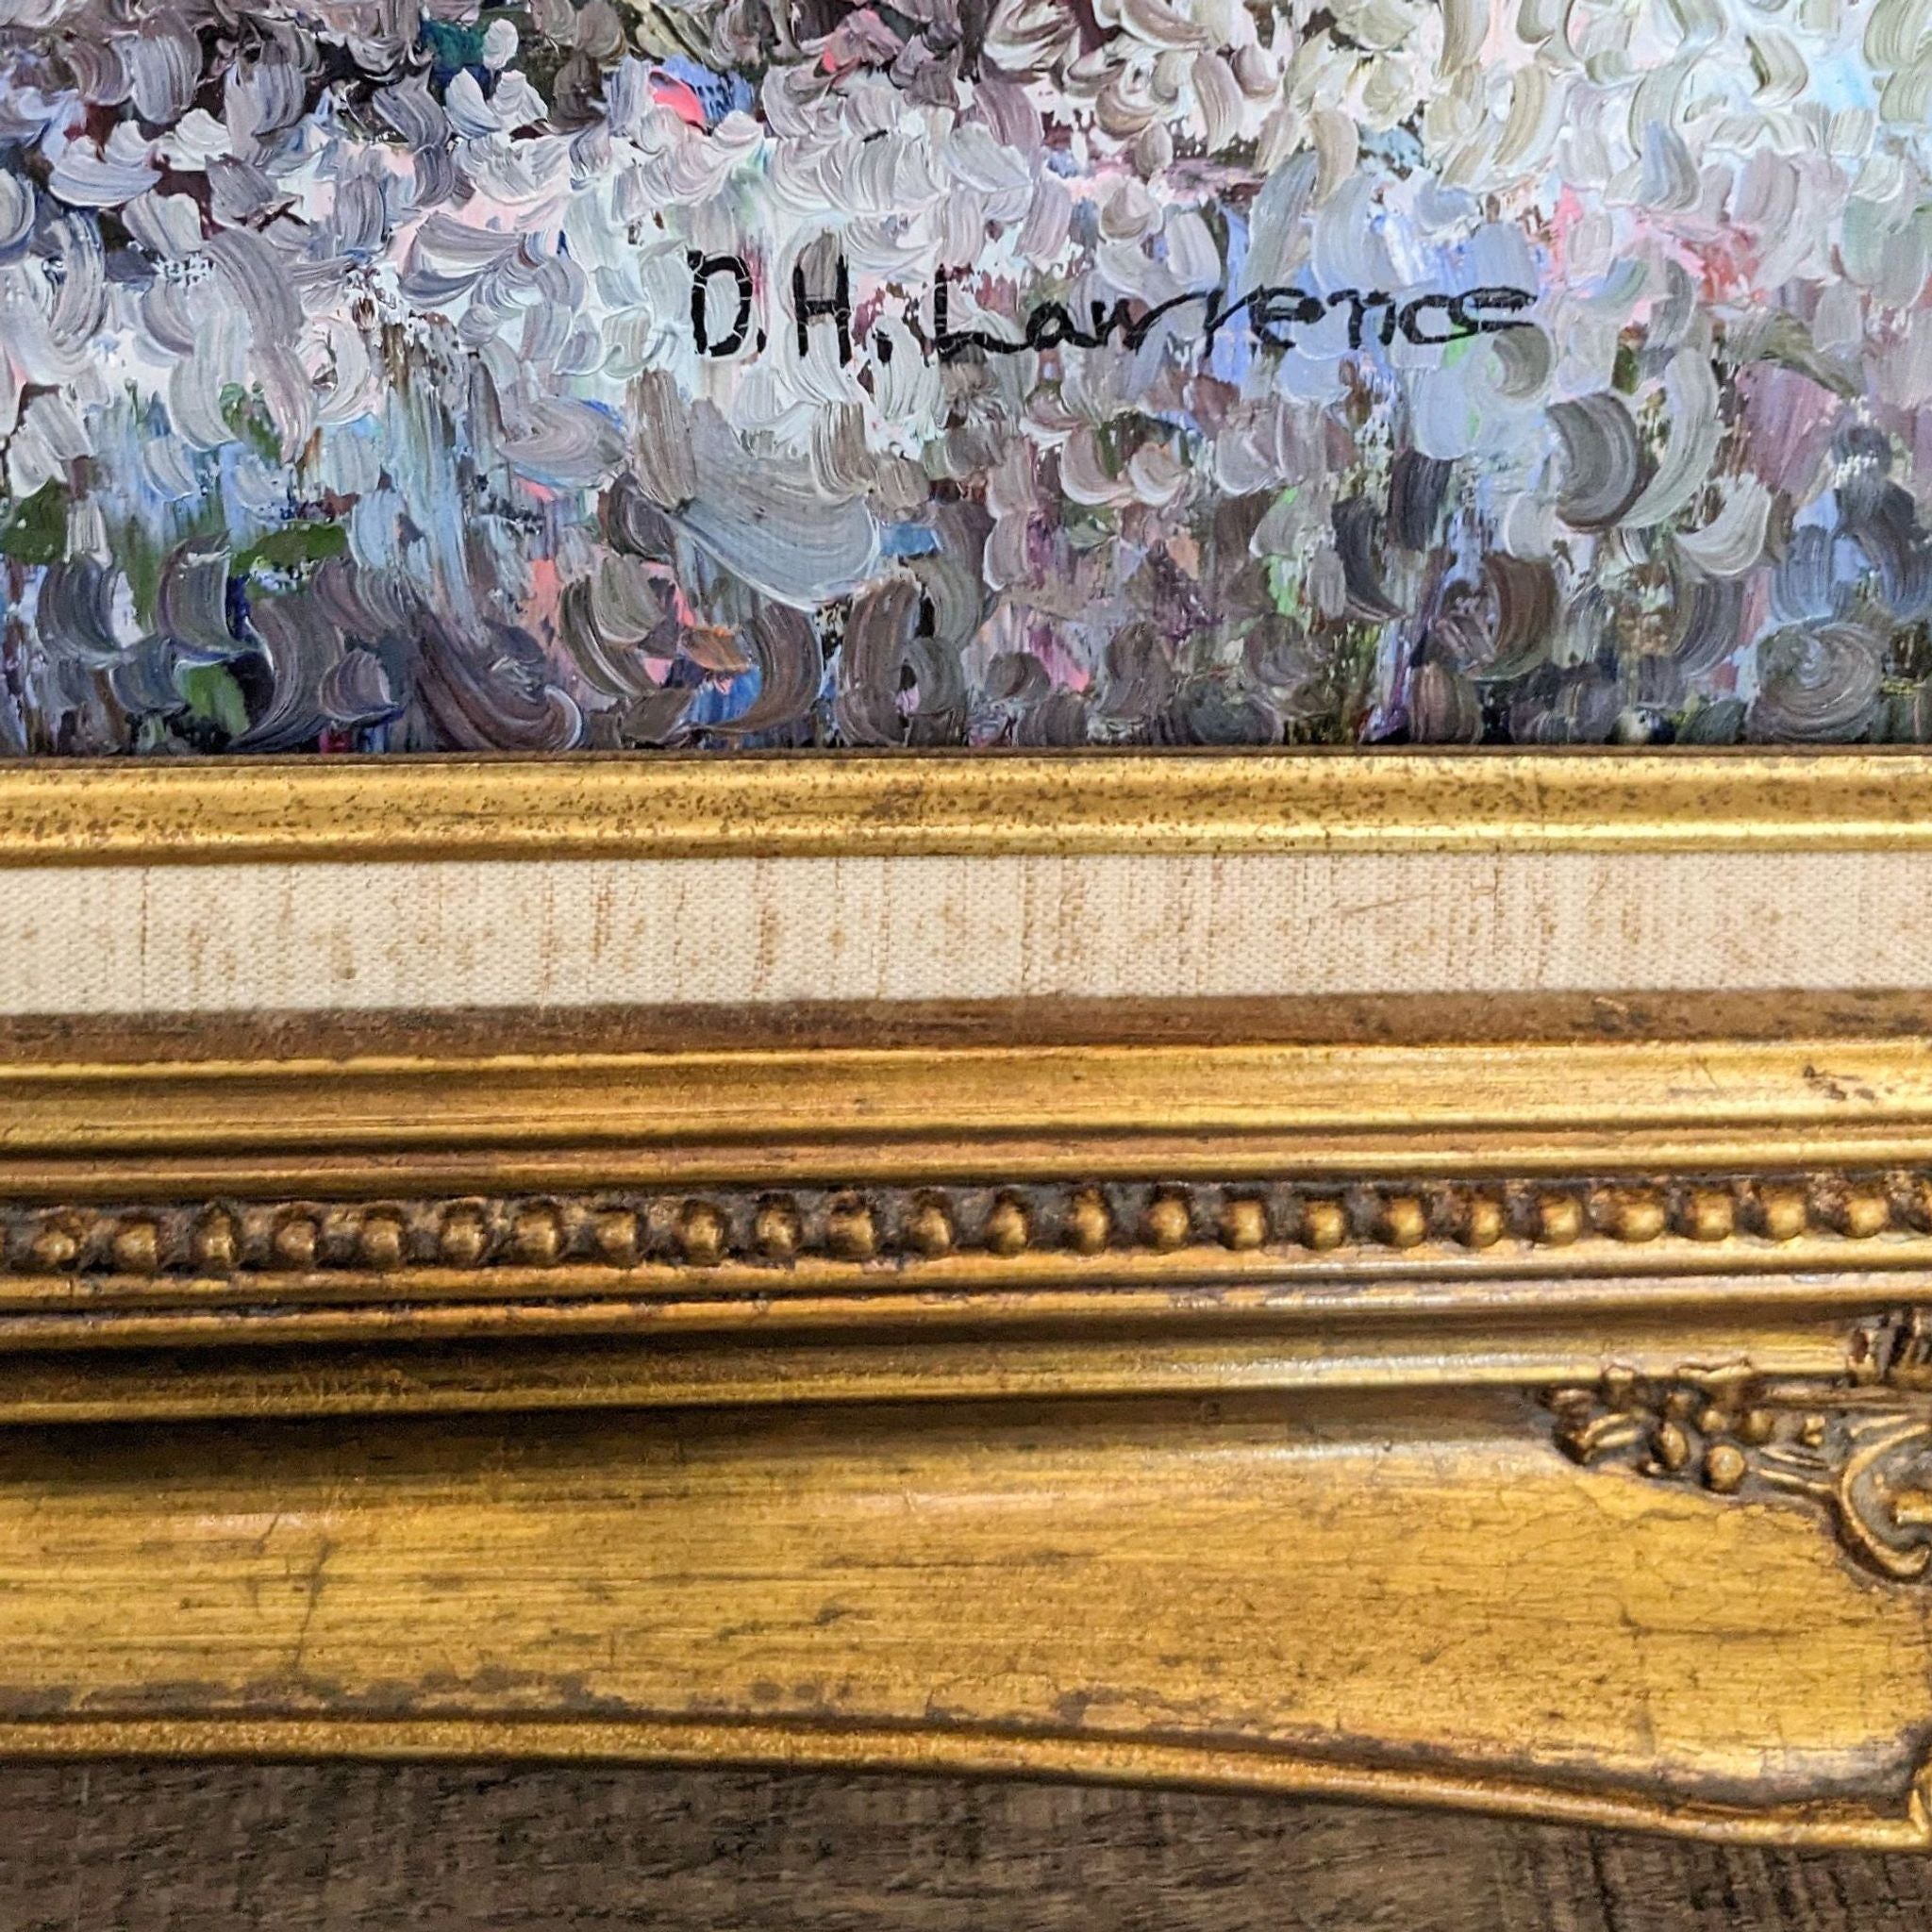 2. "Close-up of signature 'D.H. Lawrence' on a framed pastoral oil painting with ornate details on frame."